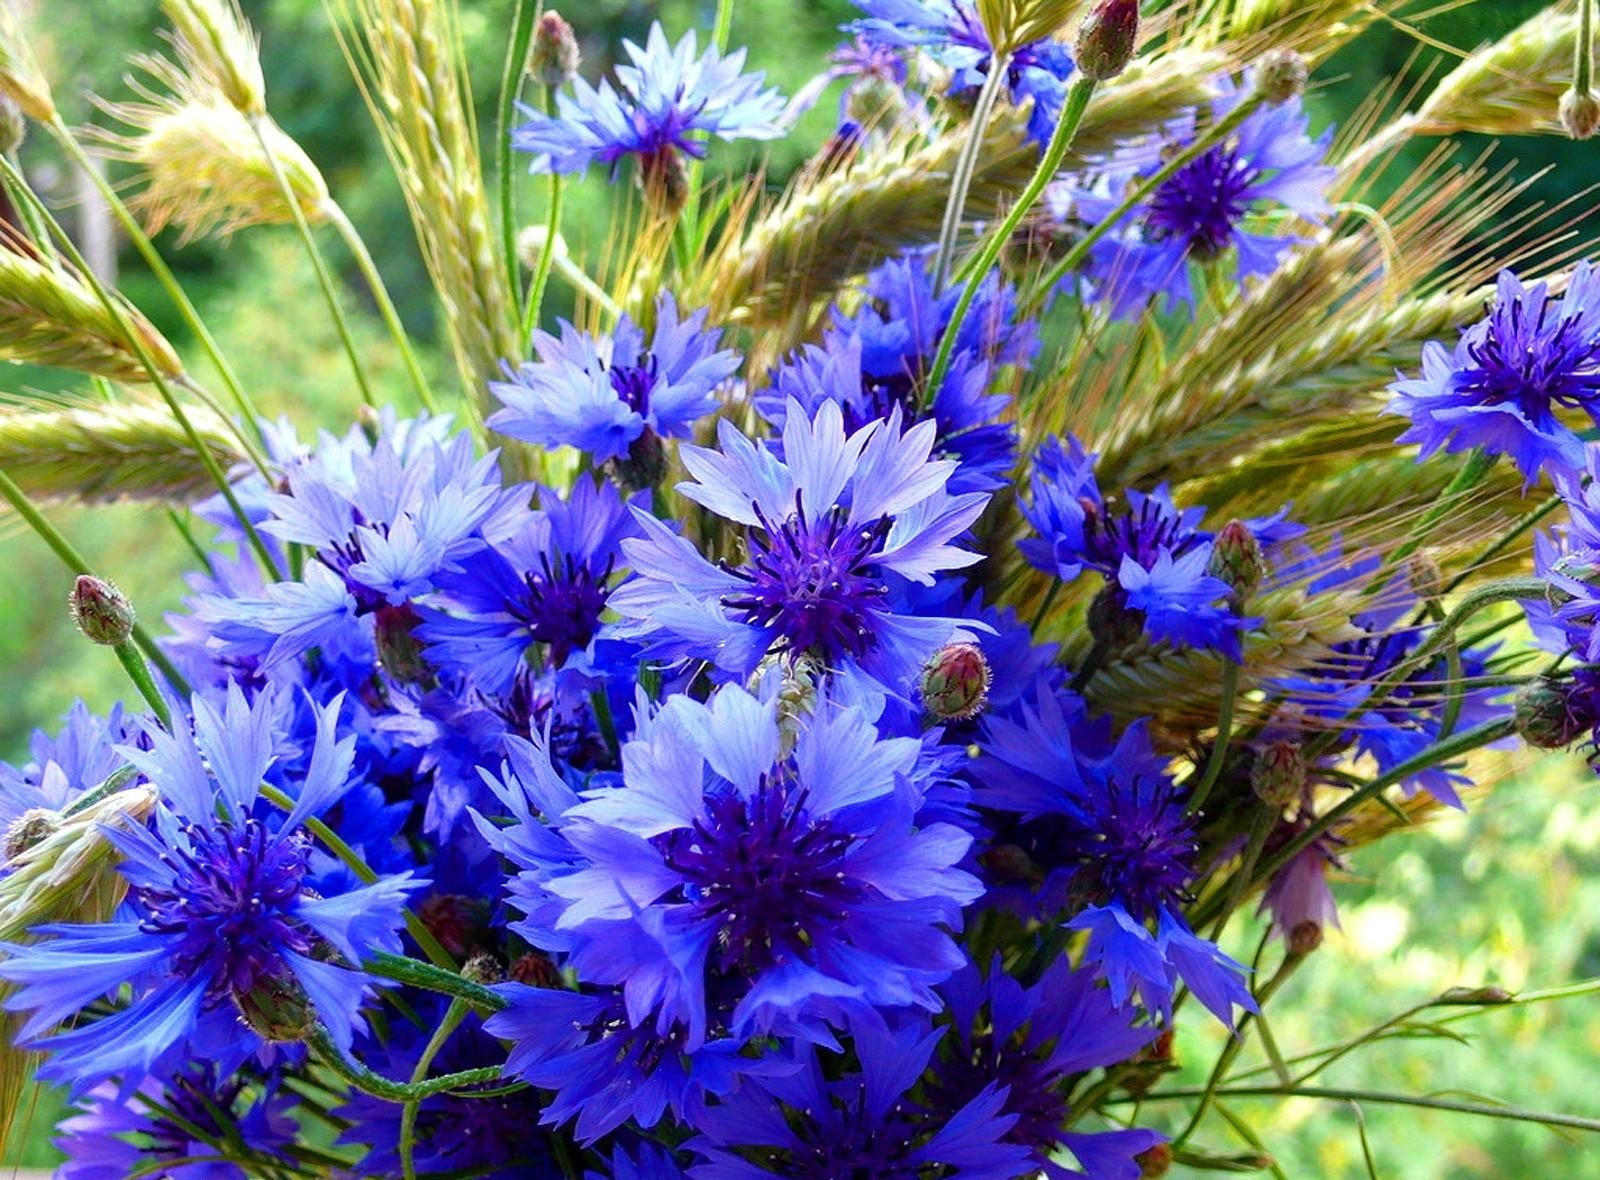 60693 download wallpaper flowers, cones, summer, blue cornflowers, bouquet, spikelets screensavers and pictures for free